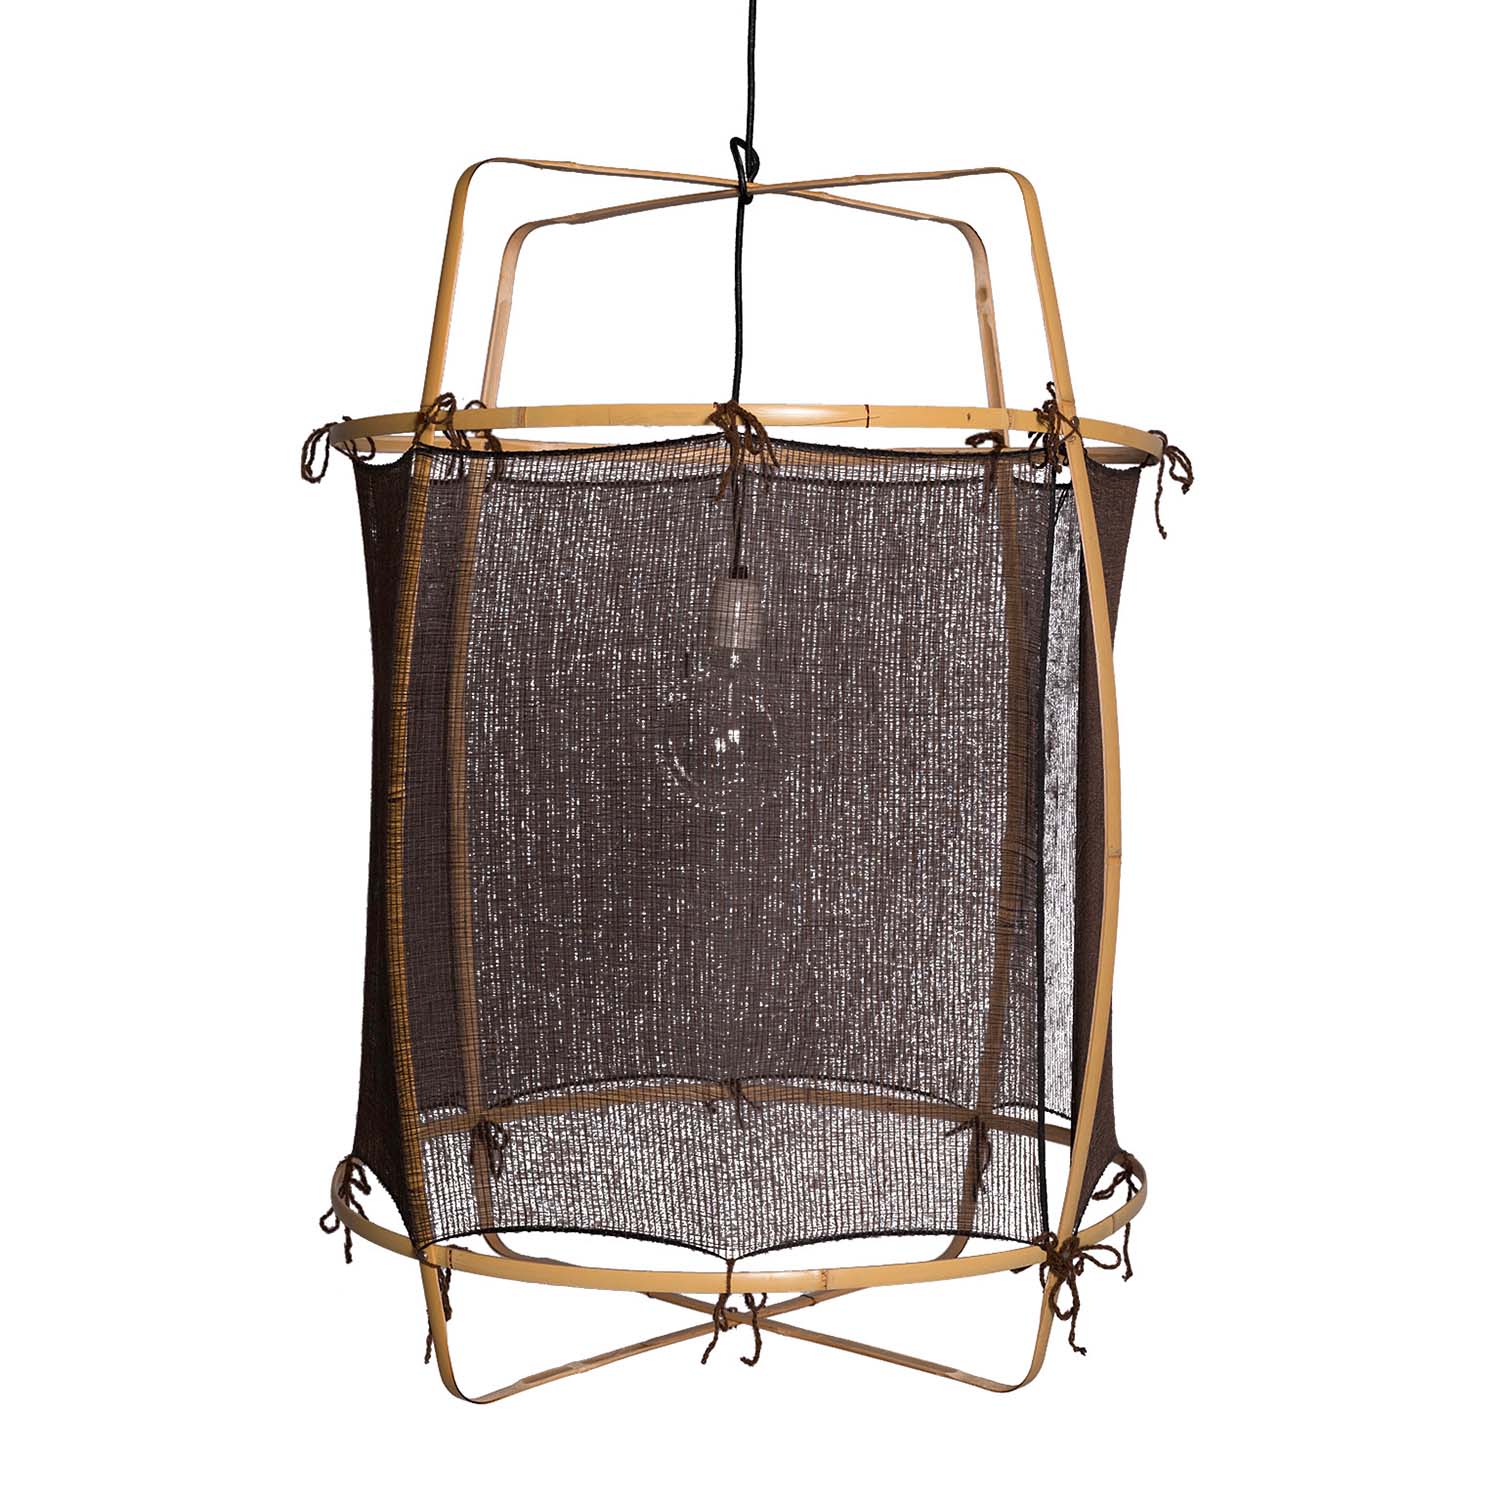 Z2 - Cage pendant light in light bamboo and white, beige, gray or black fabric